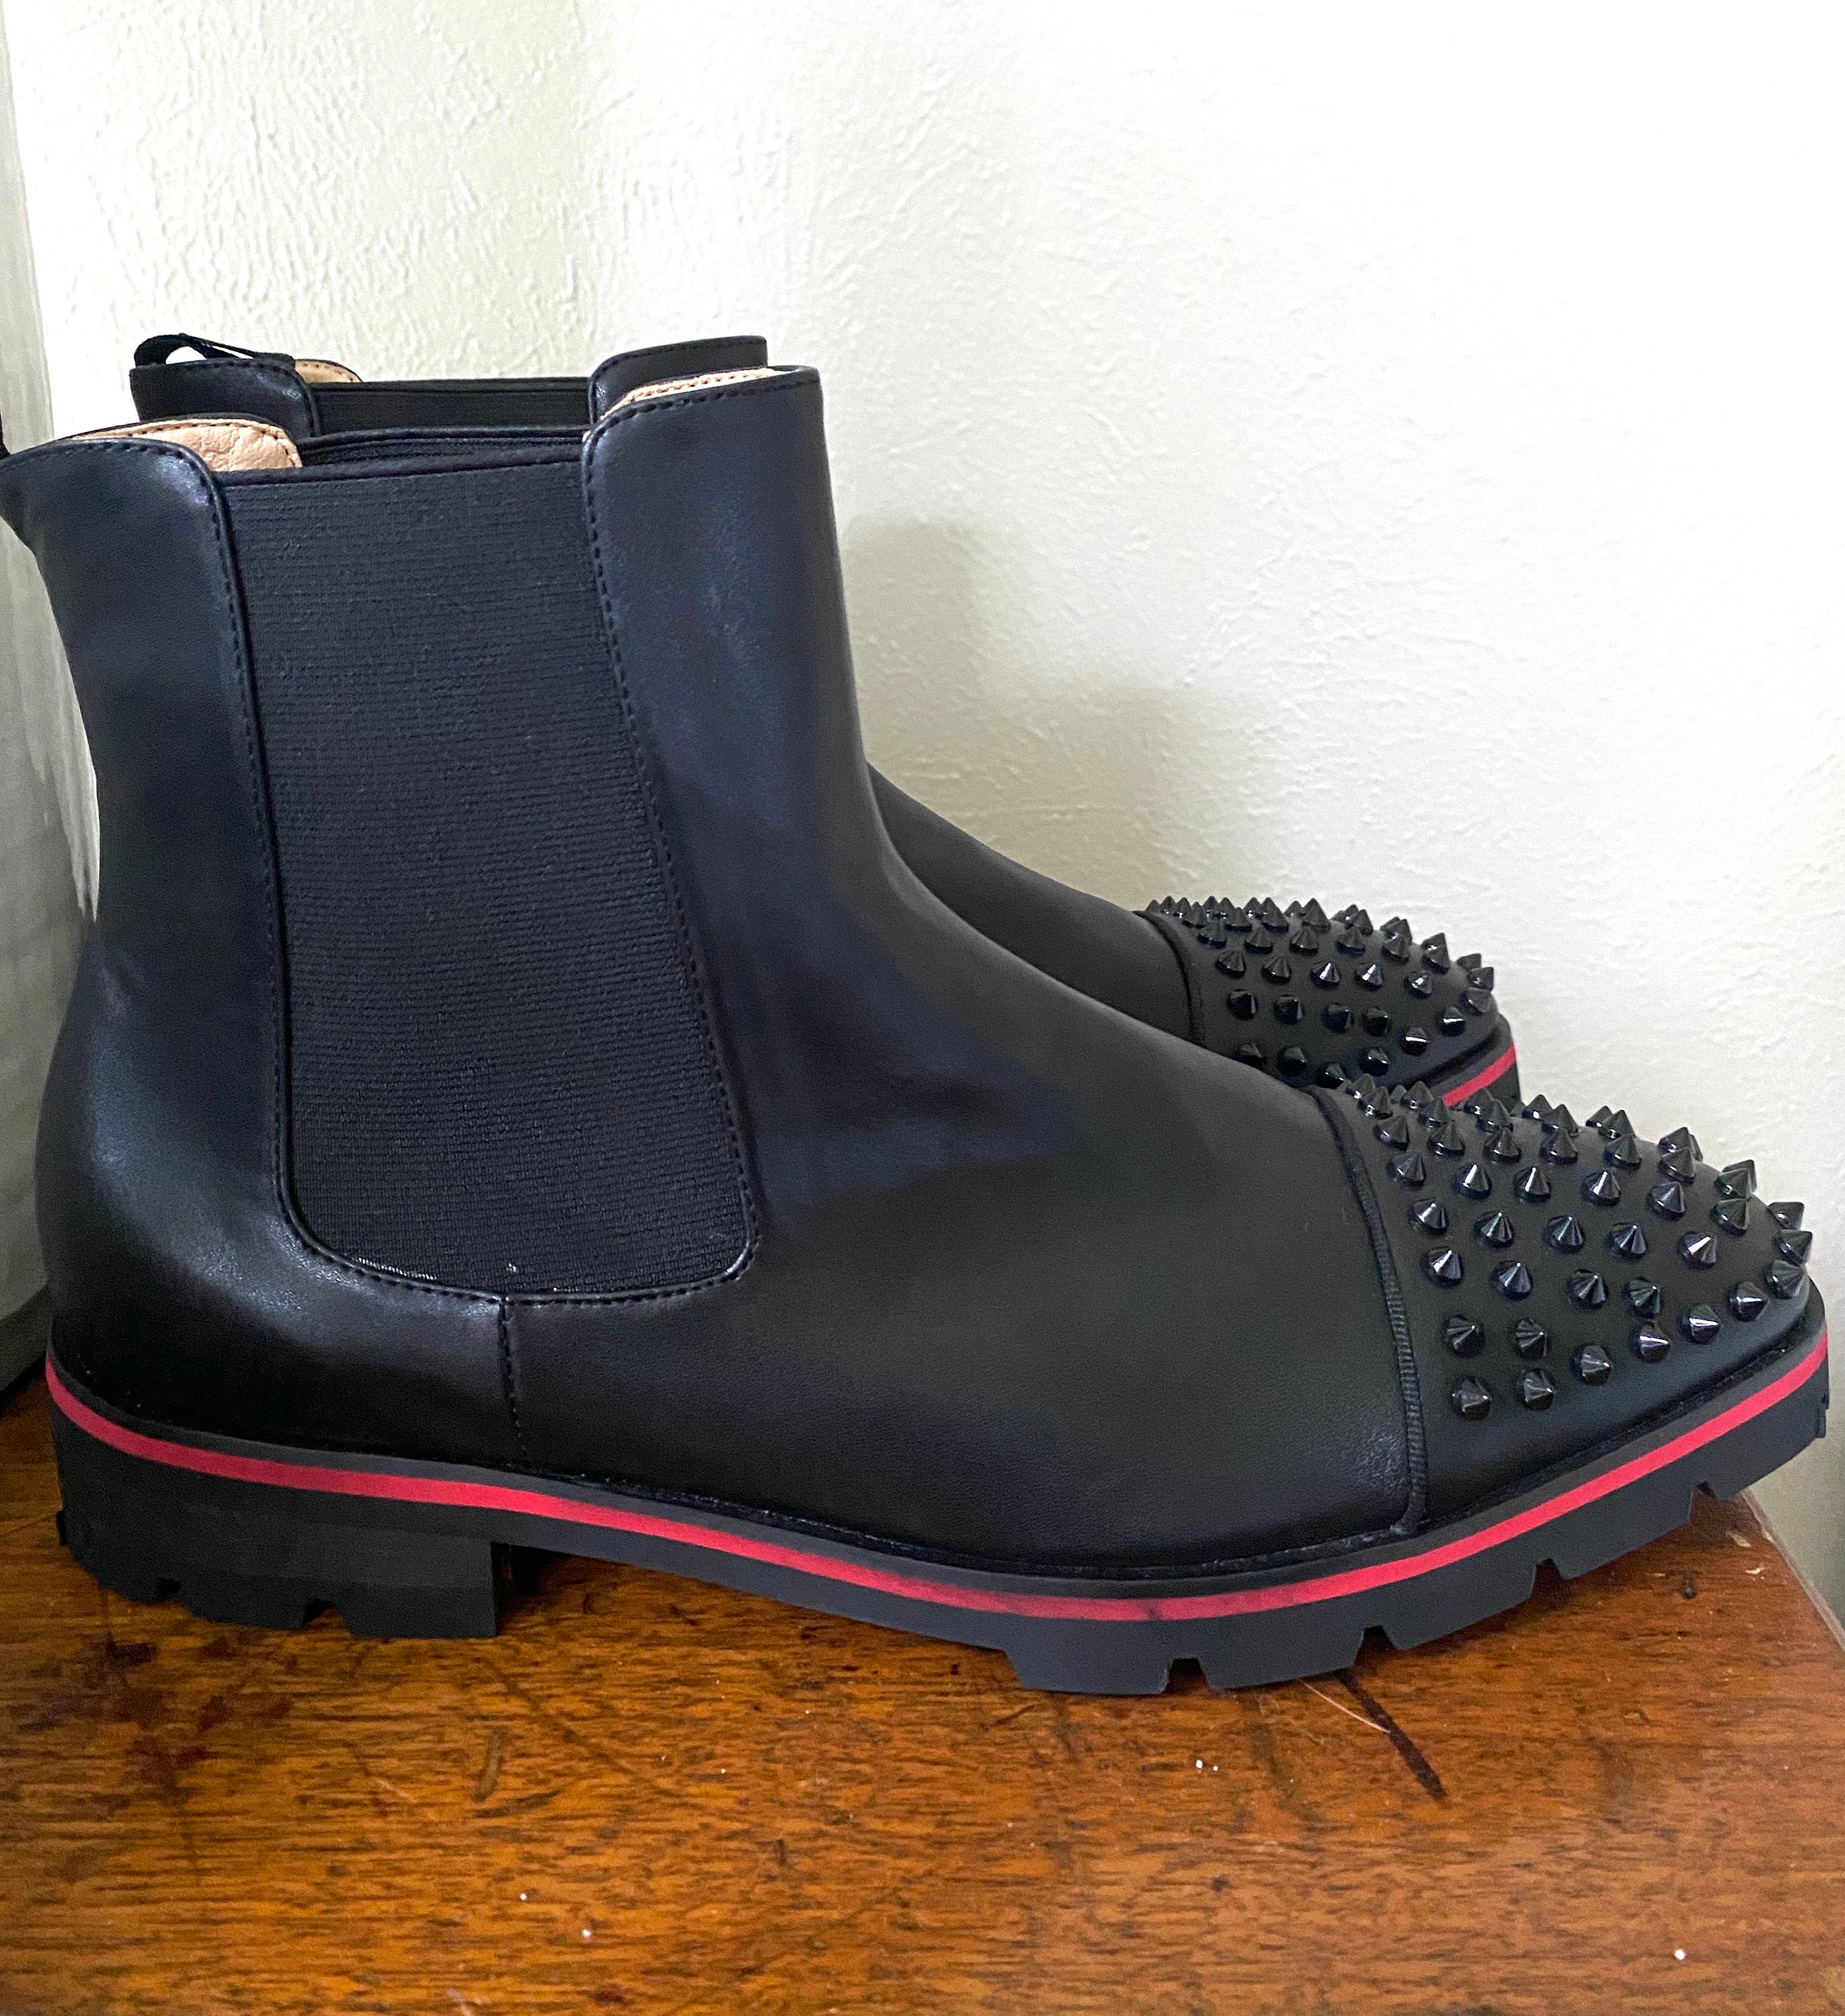 Christian Louboutin Big Lips Booty Black Leather Ankle Boots 39 UK